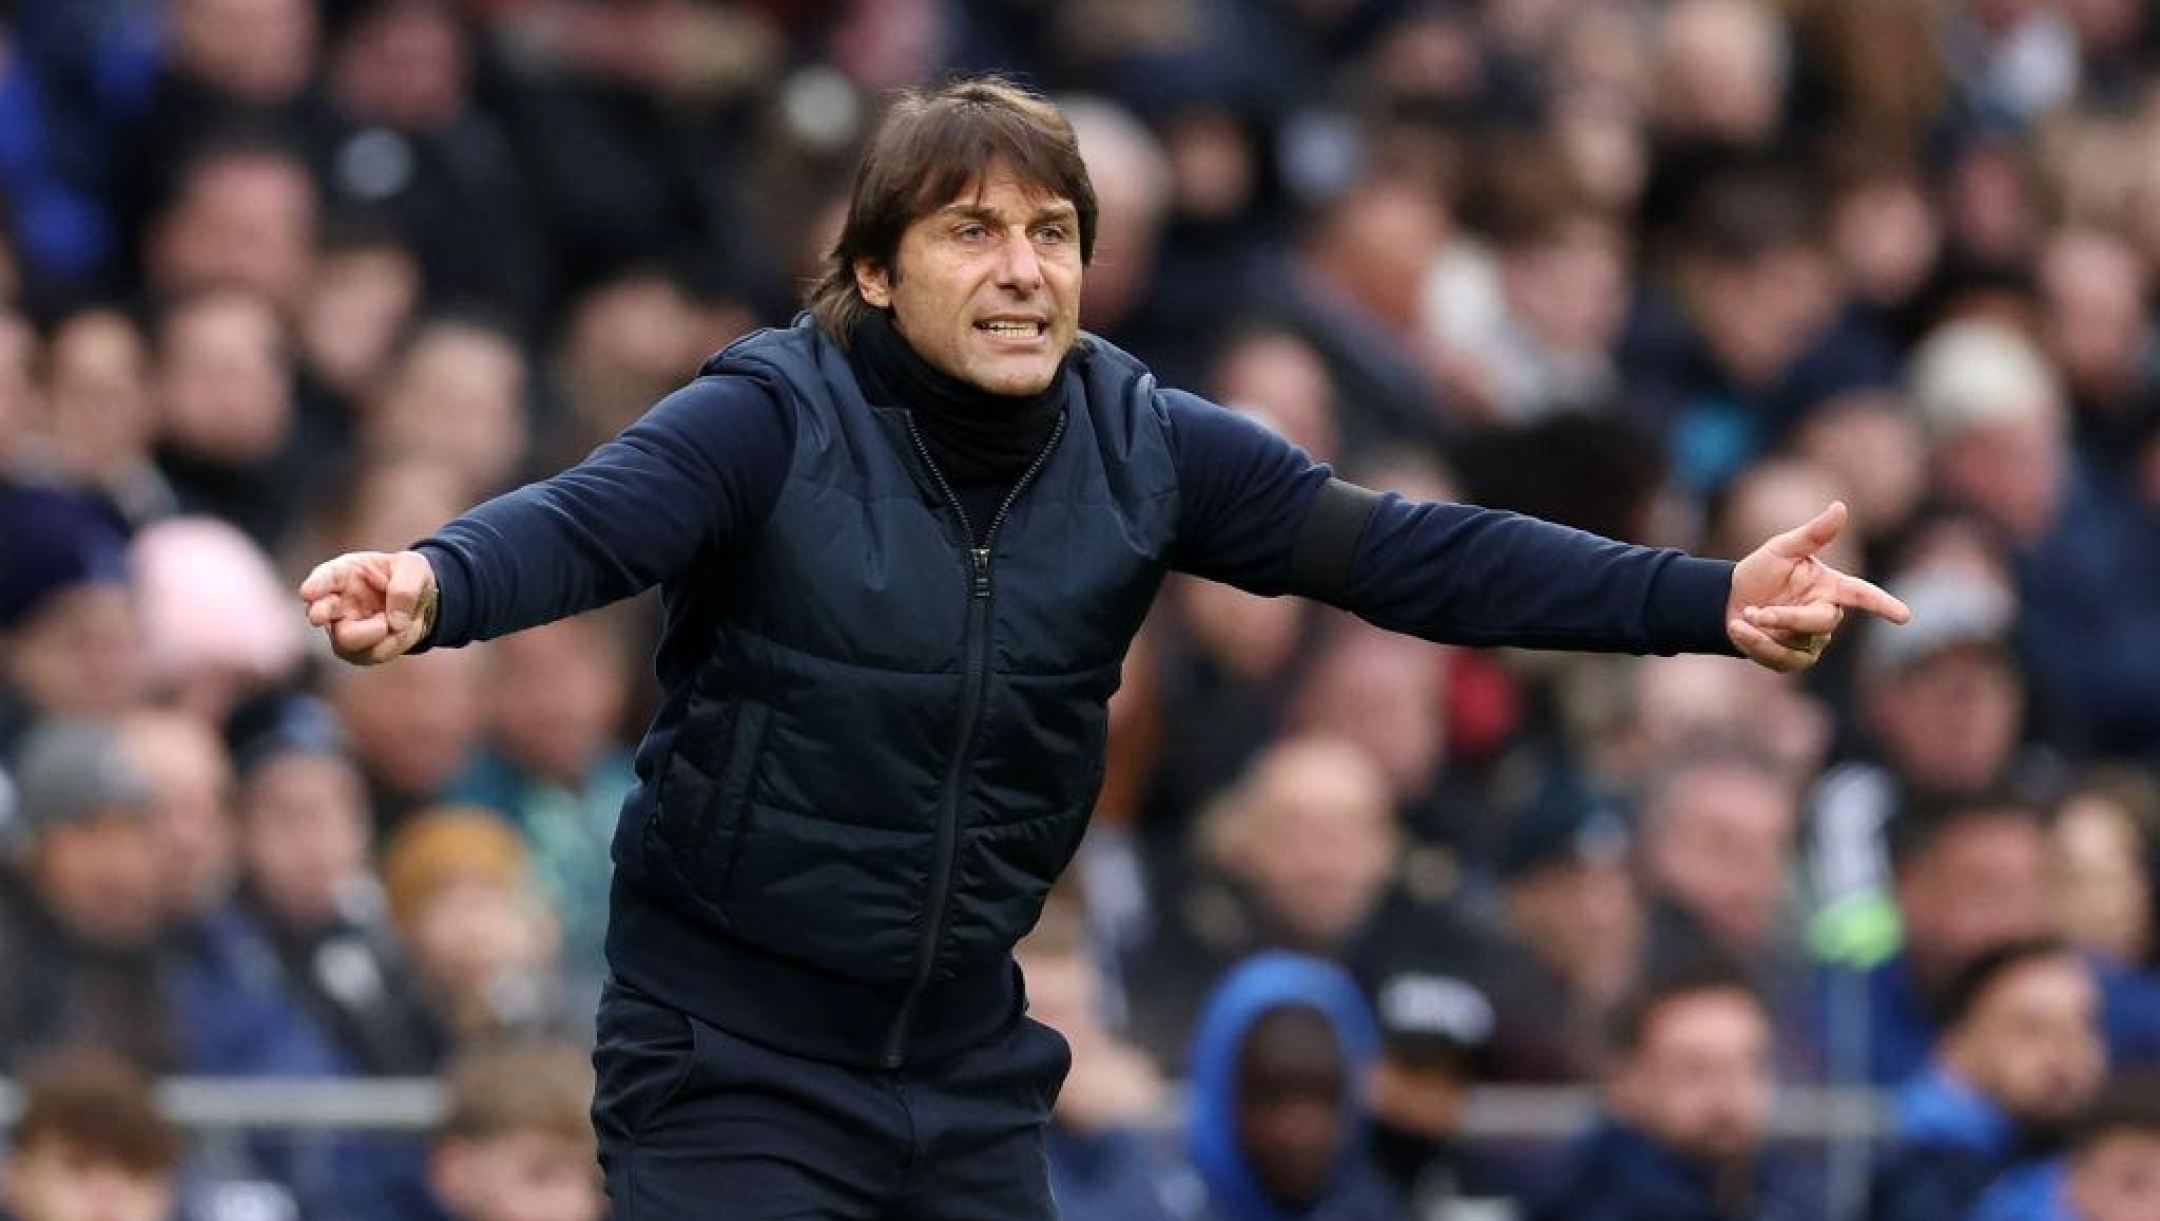 LONDON, ENGLAND - JANUARY 07: Antonio Conte, Manager of Tottenham Hotspur, reacts during the Emirates FA Cup Third Round match between Tottenham Hotspur and Portsmouth FC at Tottenham Hotspur Stadium on January 07, 2023 in London, England. (Photo by Julian Finney/Getty Images)